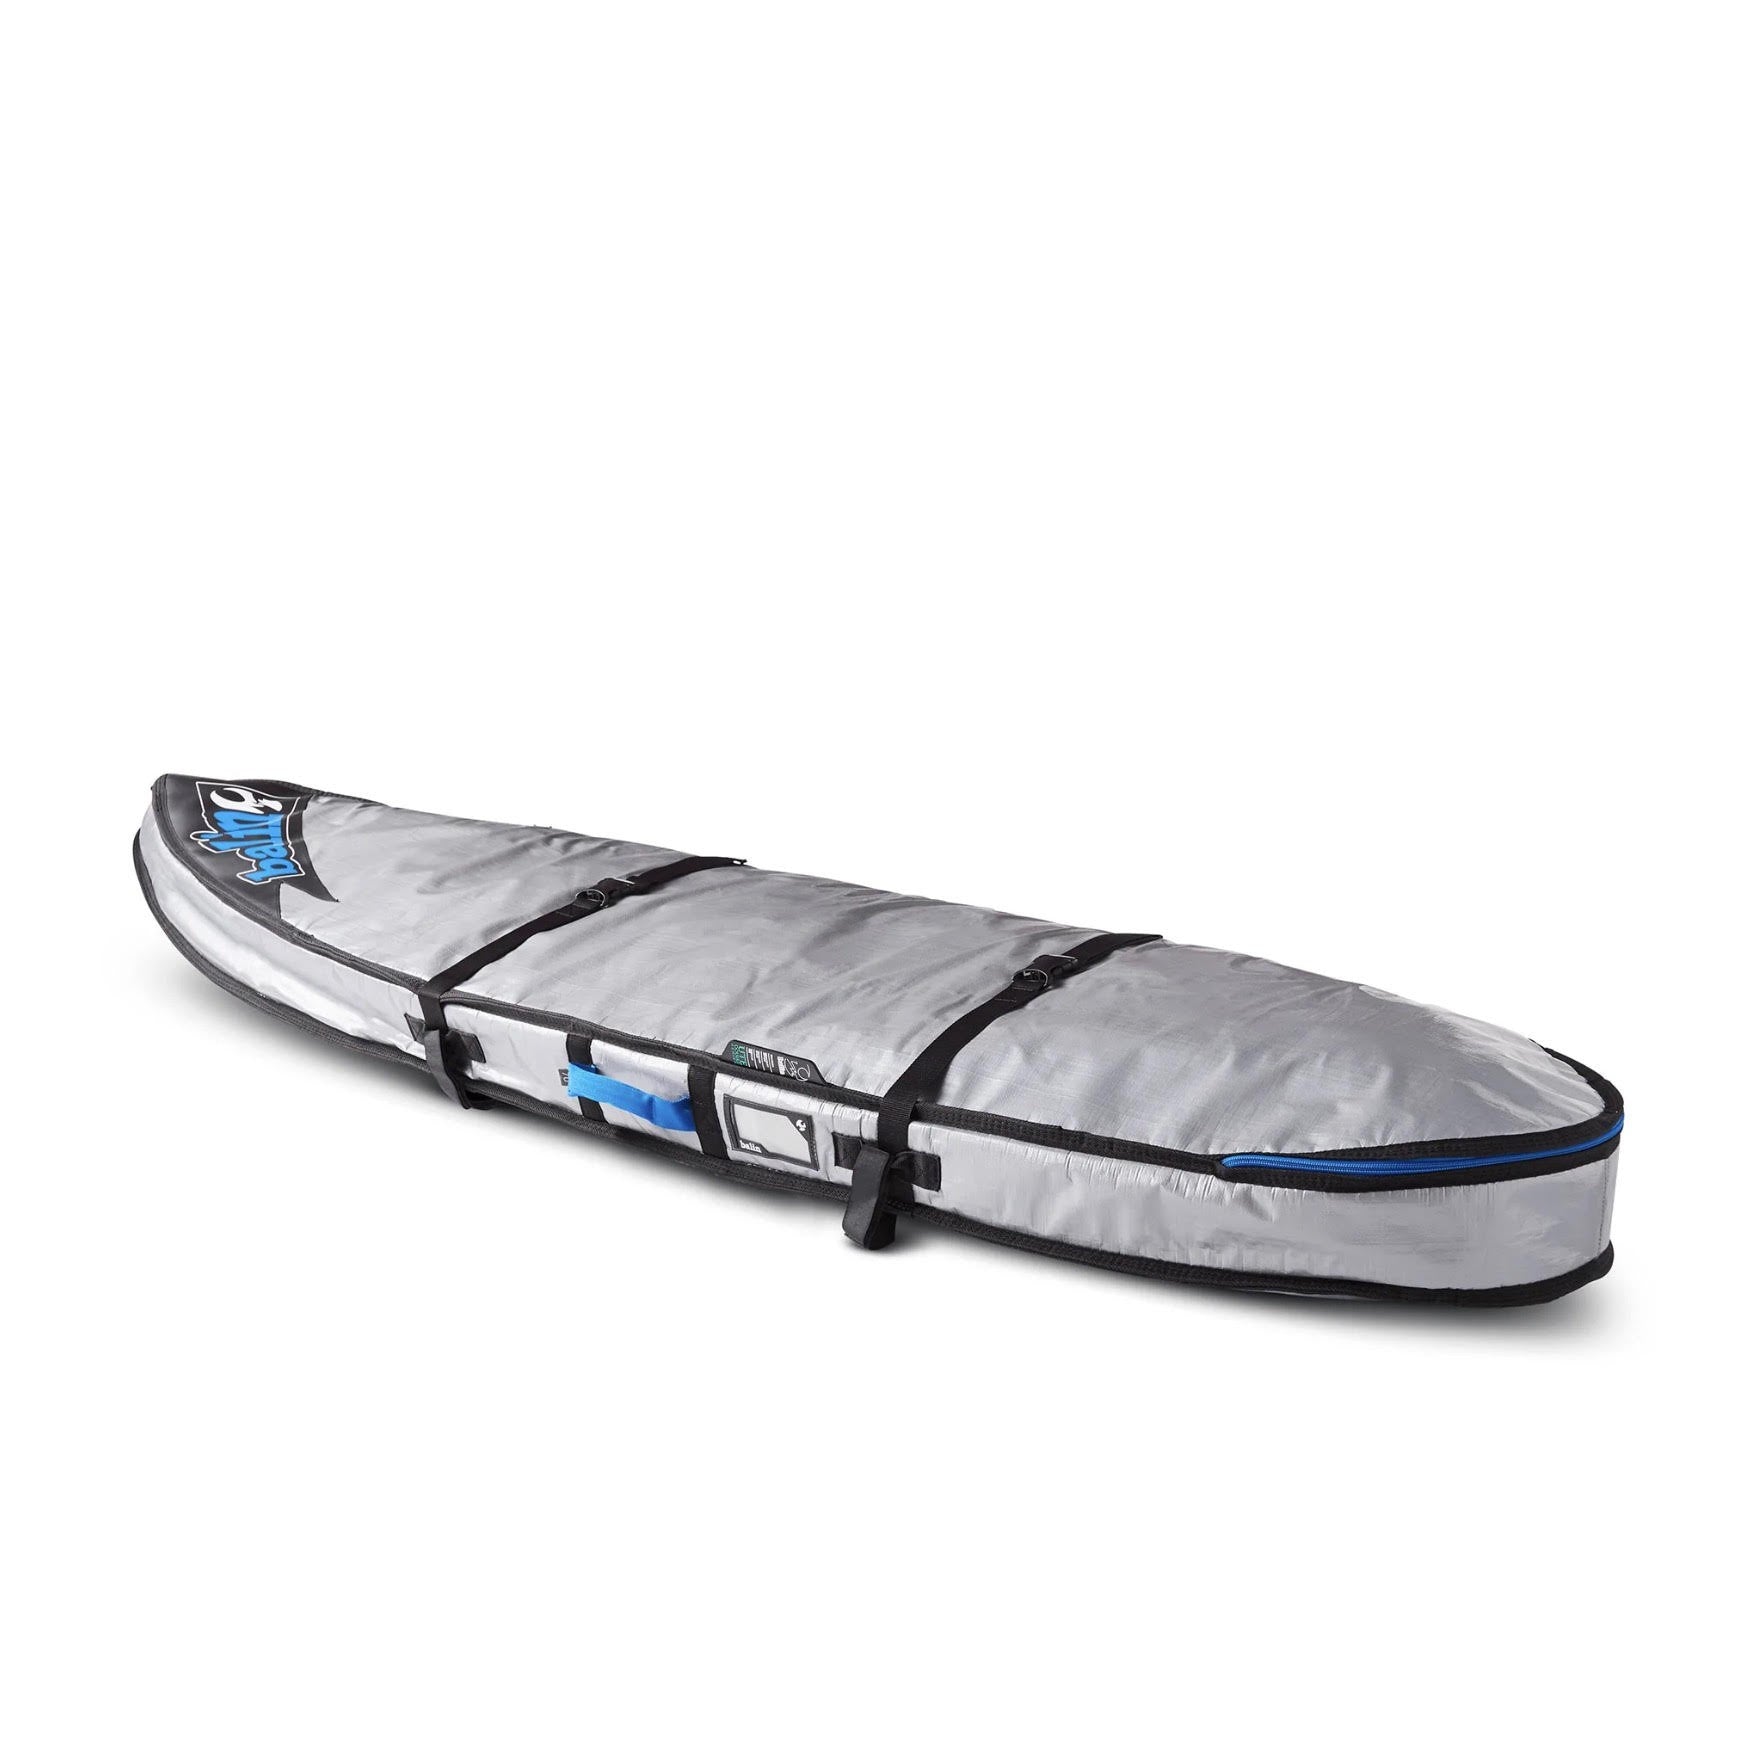 BALIN - Double surf cover for 2 boards - UTE - Shortboard 10mm - Blue